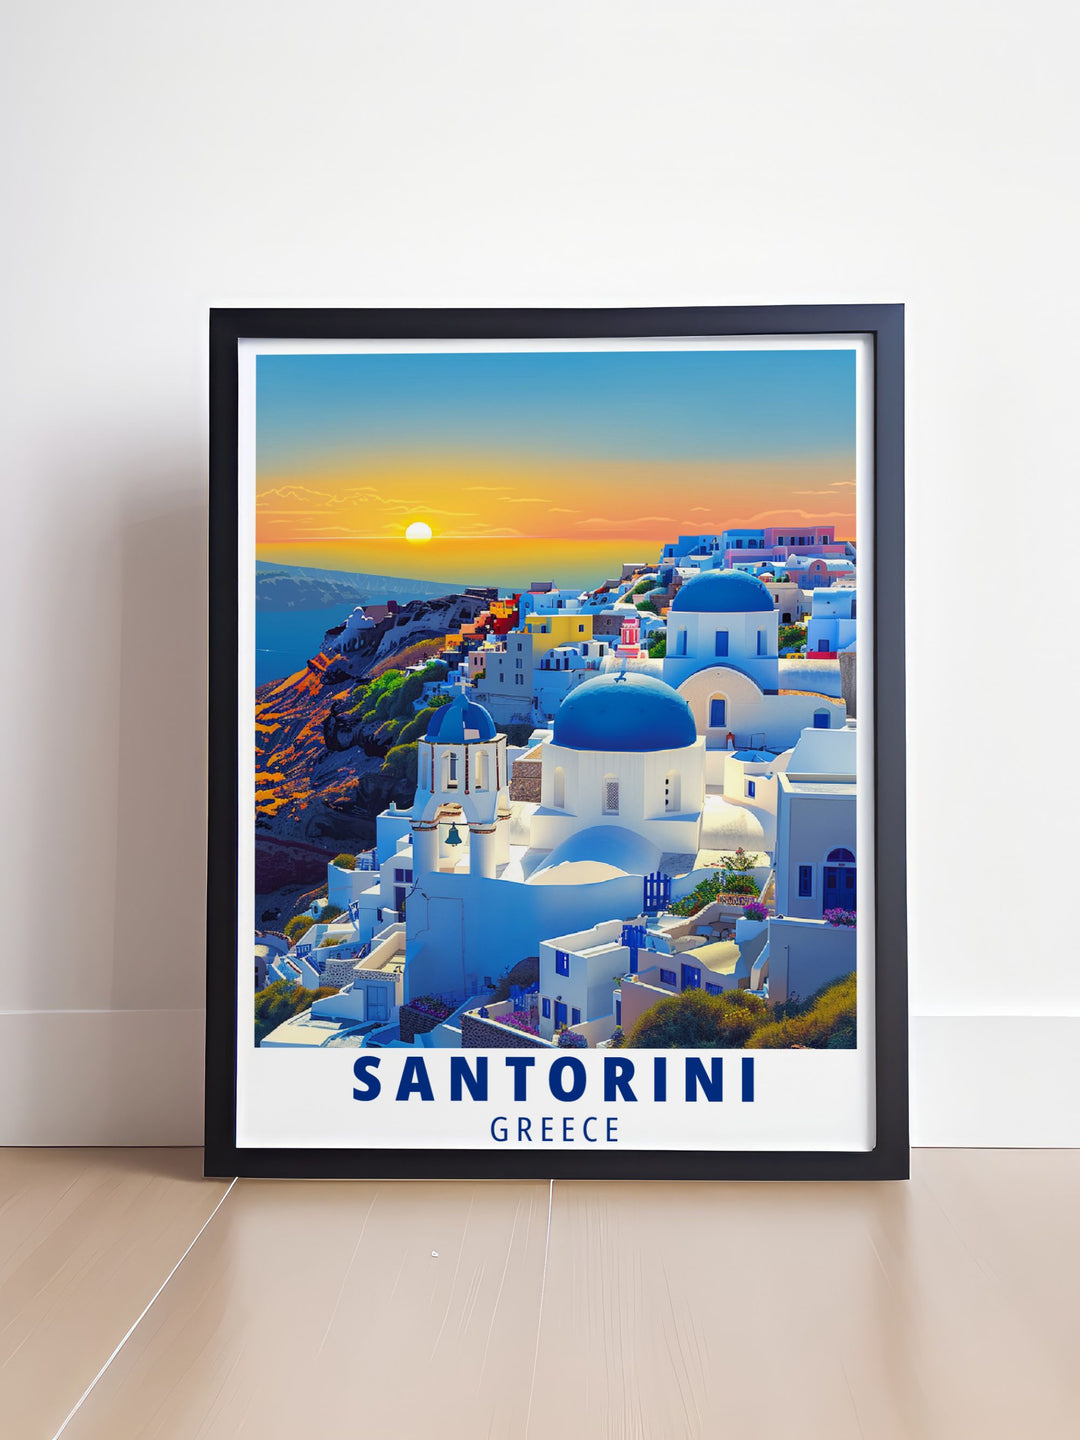 This travel print of Oia, Santorini, captures the iconic views and artistic spirit of the island. Perfect for adding a touch of Greek beauty to your living space.